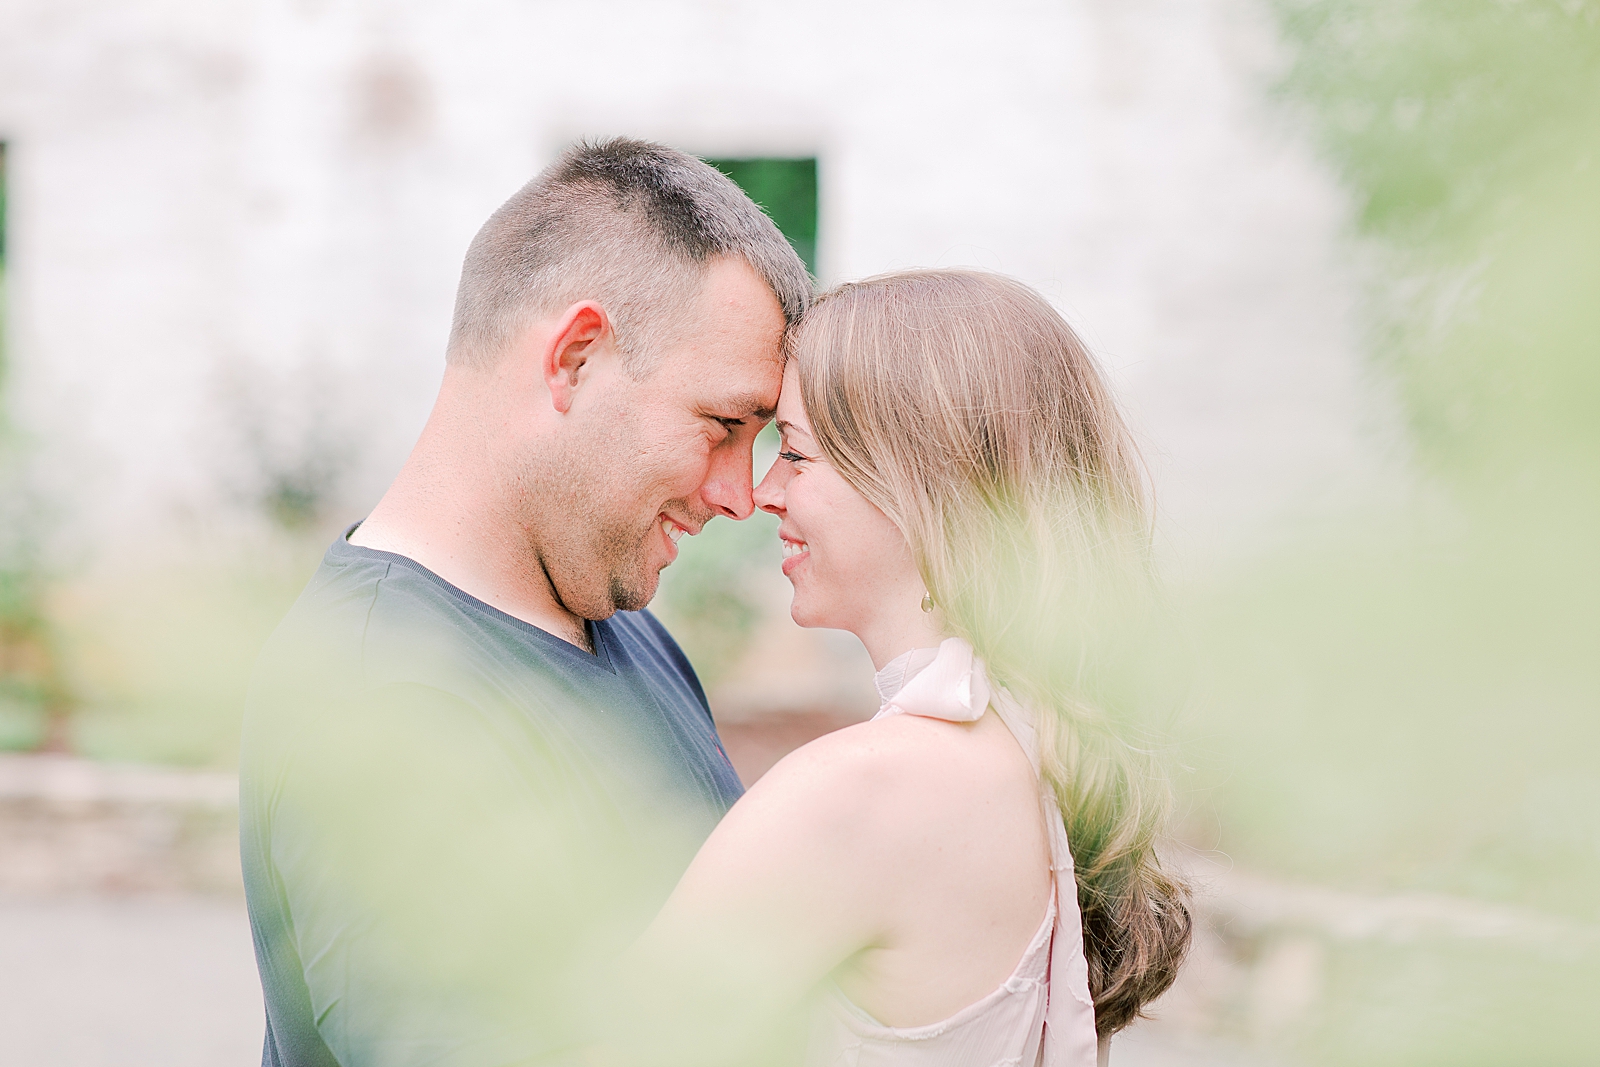 Hackney Warehouse Engagement Session Couple nose to nose smiling Photo